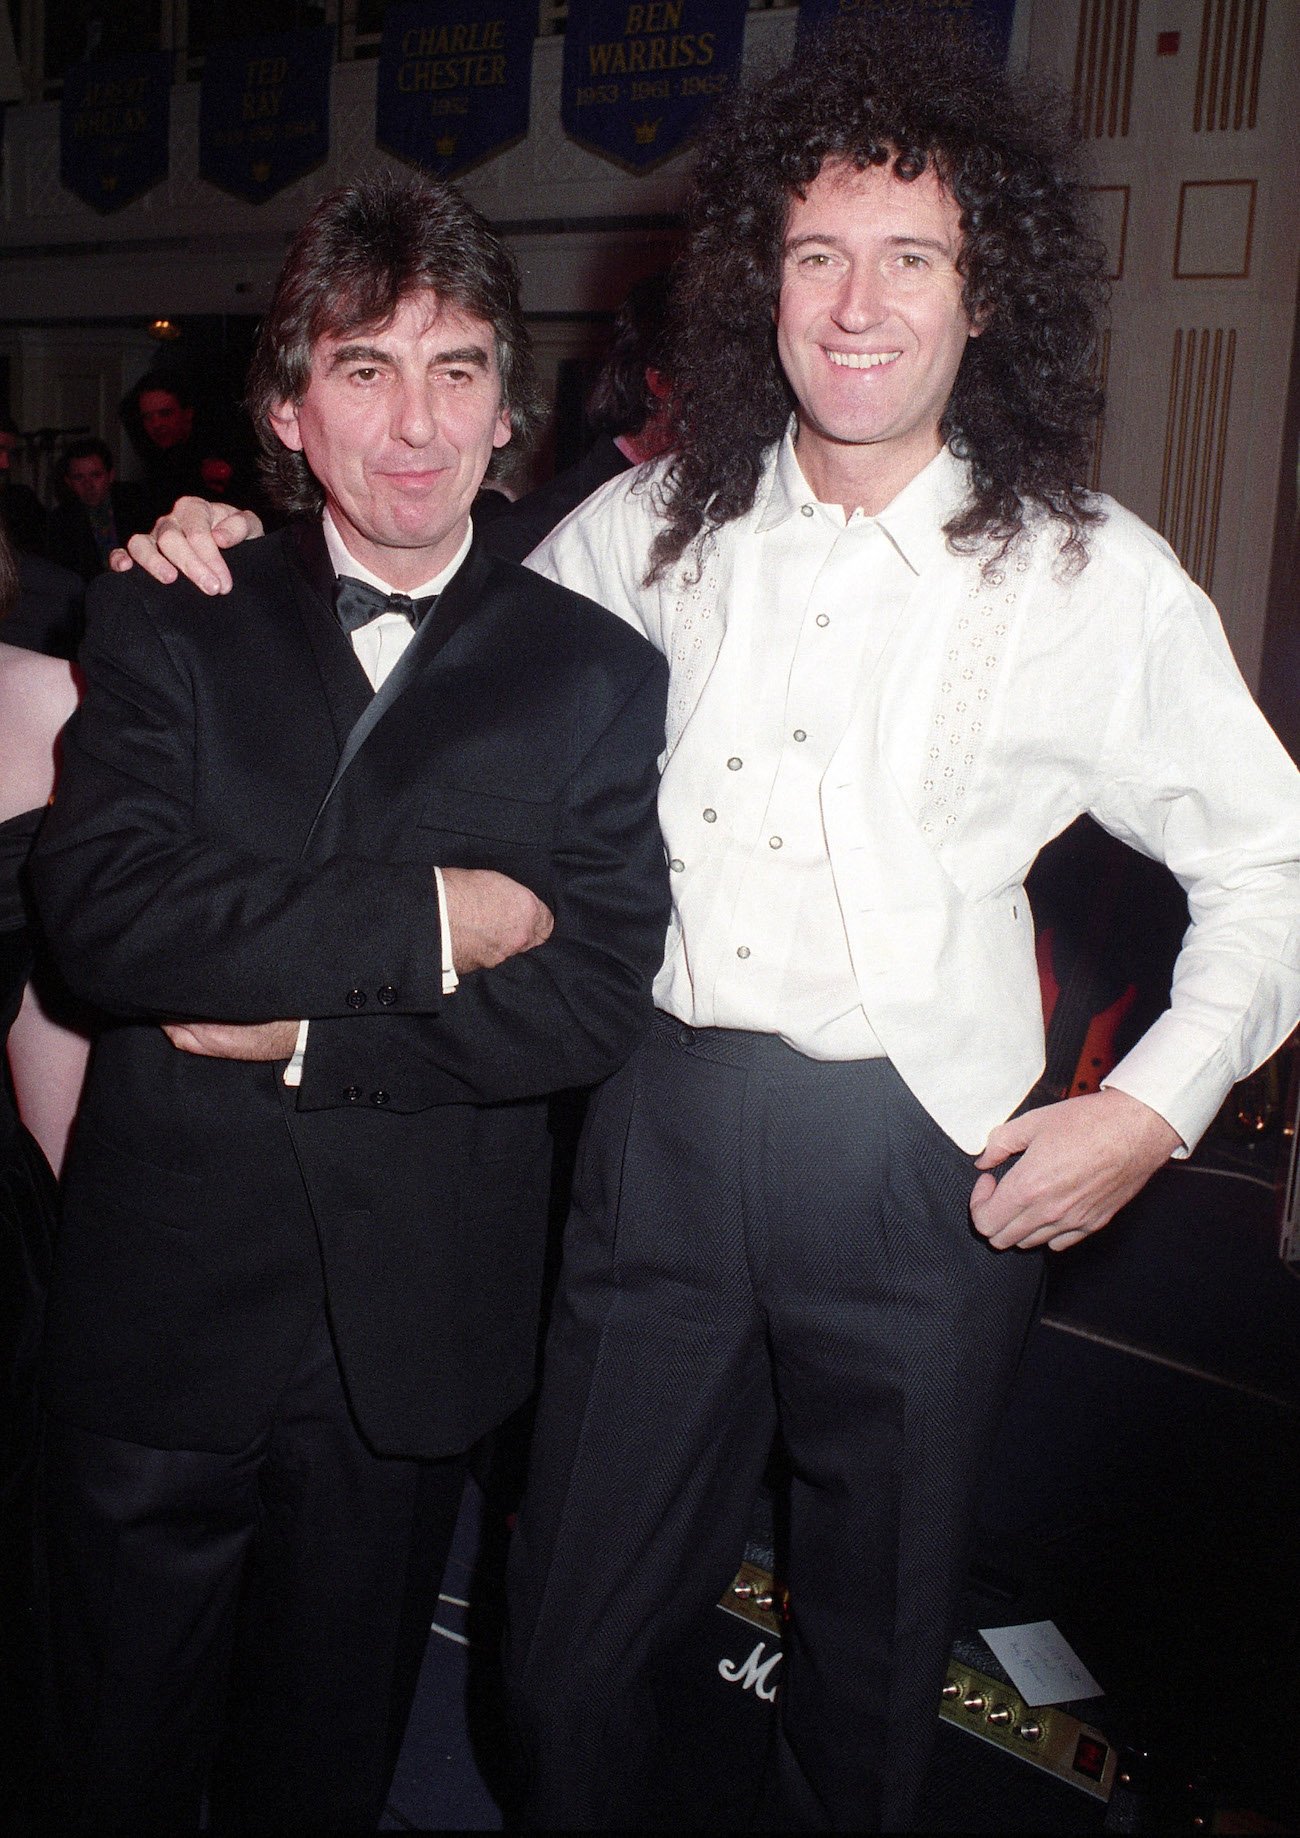 George Harrison and Brian May at the Water Rats Ball in 1992.